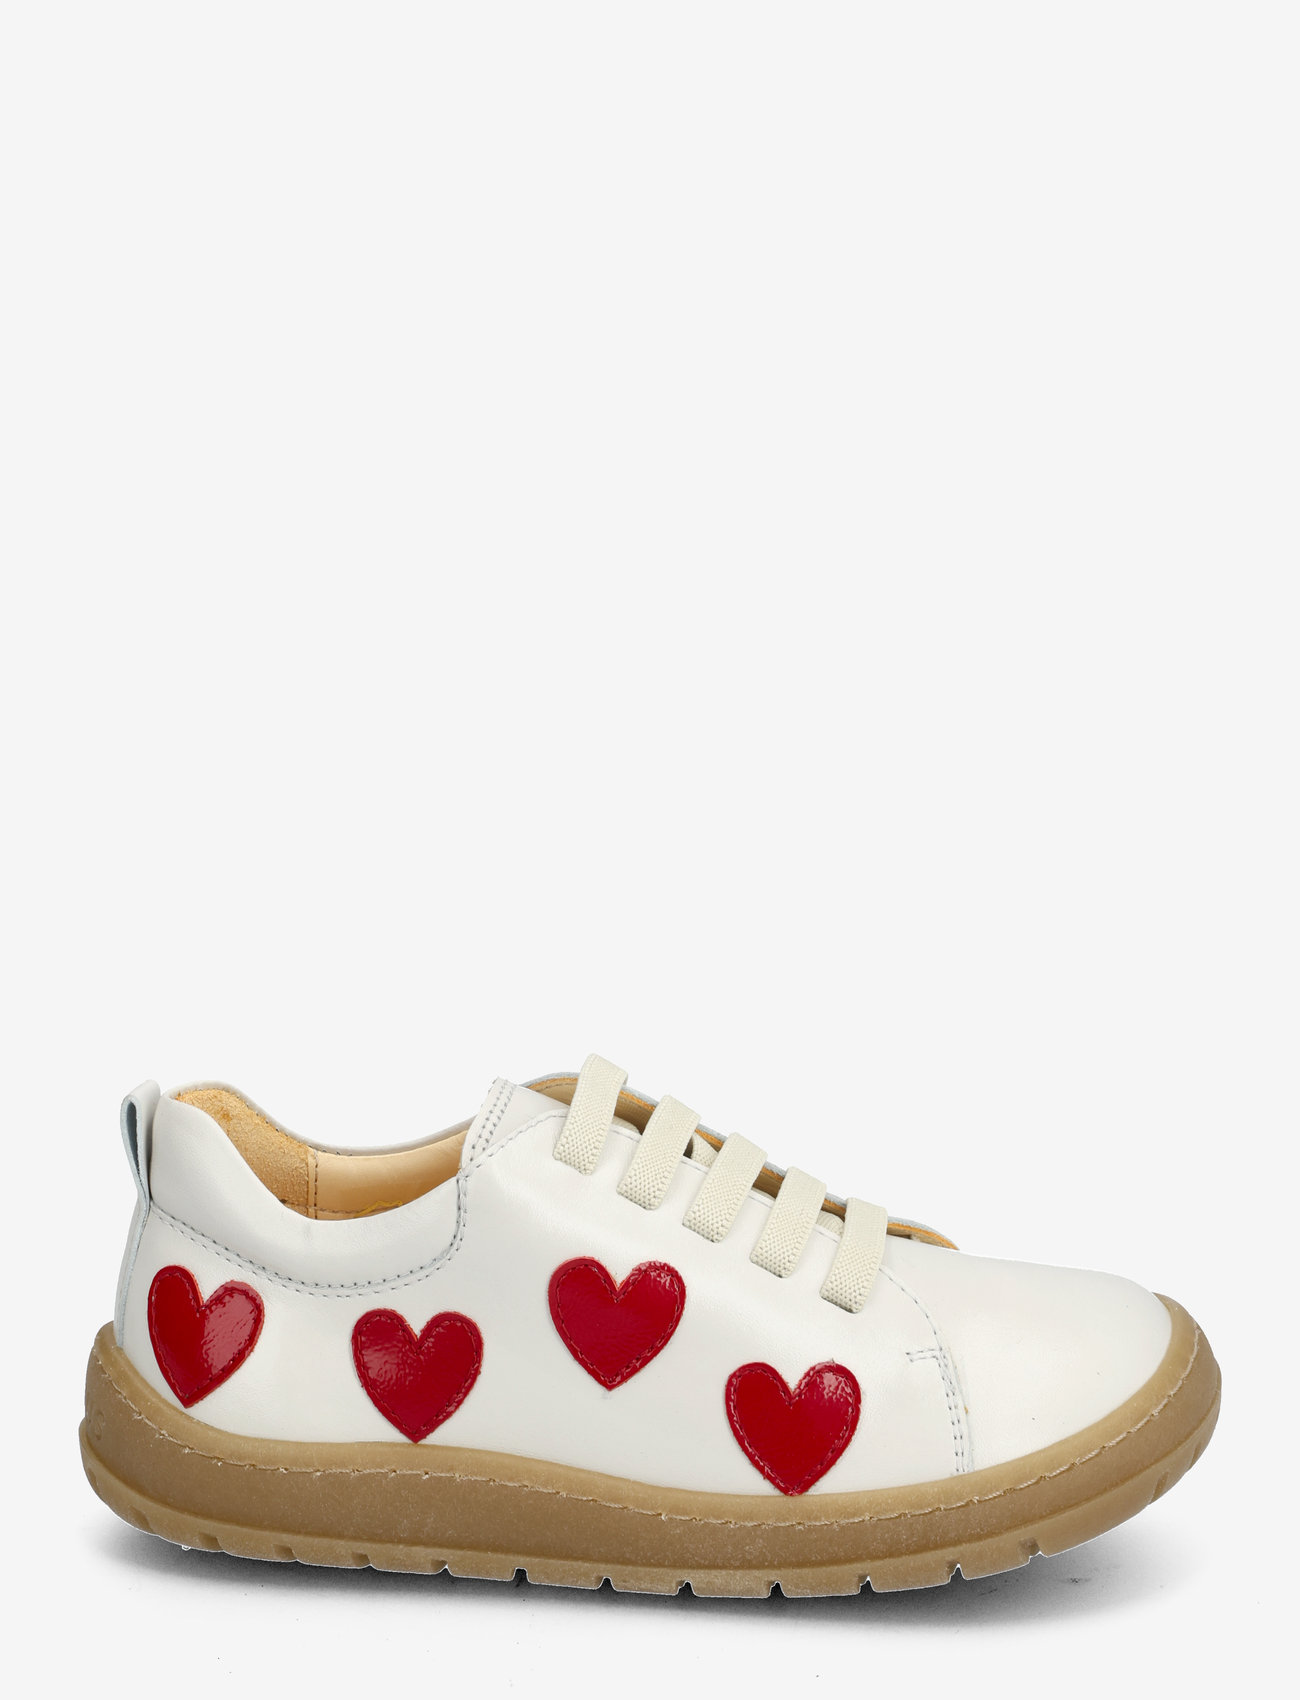 ANGULUS - Shoes - flat - with lace - low tops - 1493/a004 off white/hearts - 1